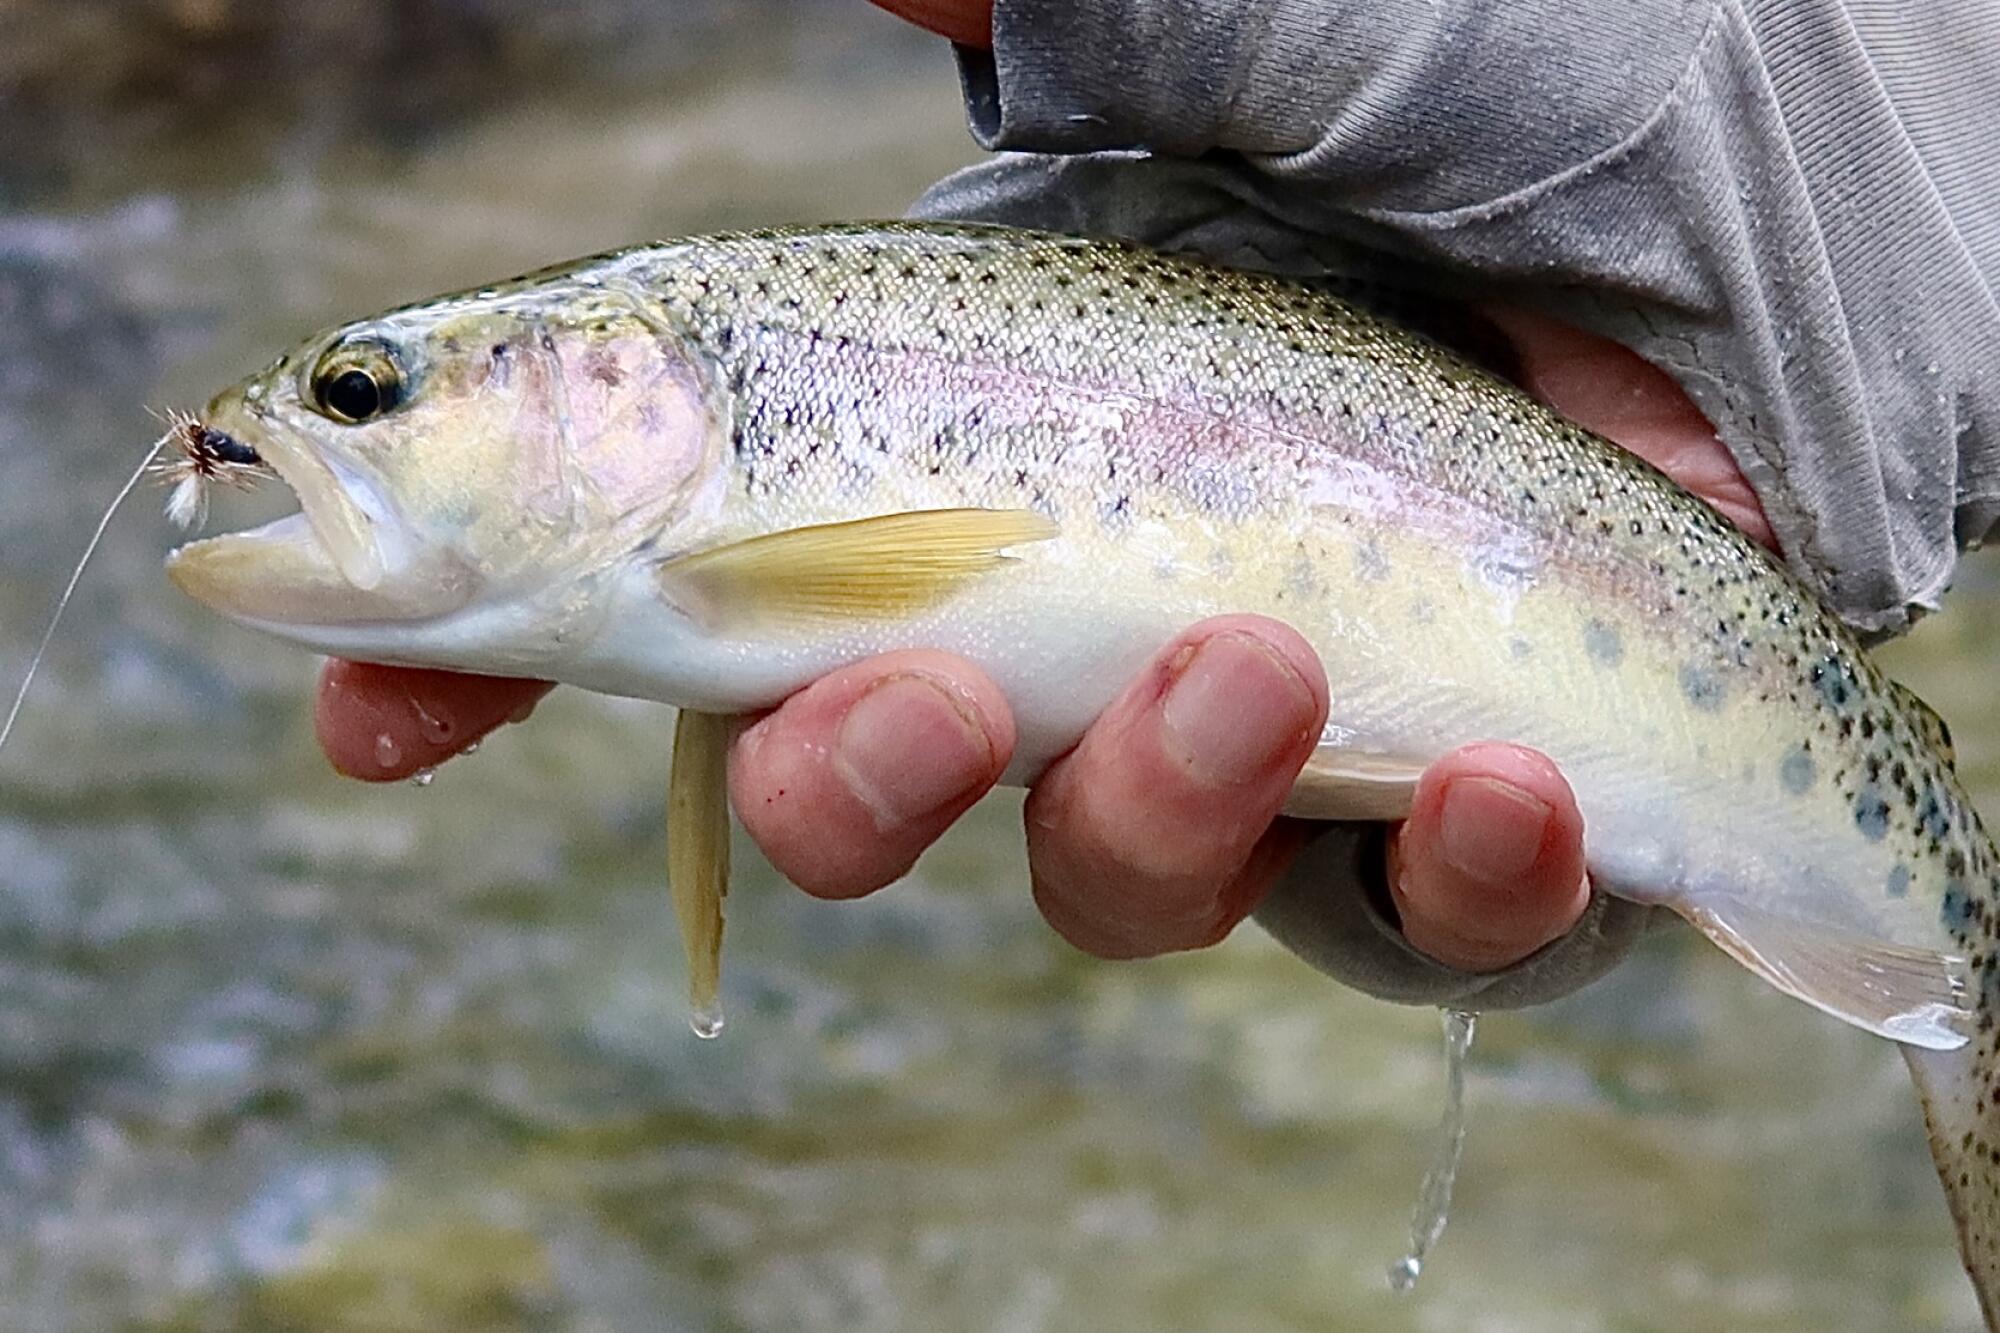 A person holds a rainbow trout, a fish with spots and a pinkish stripe.